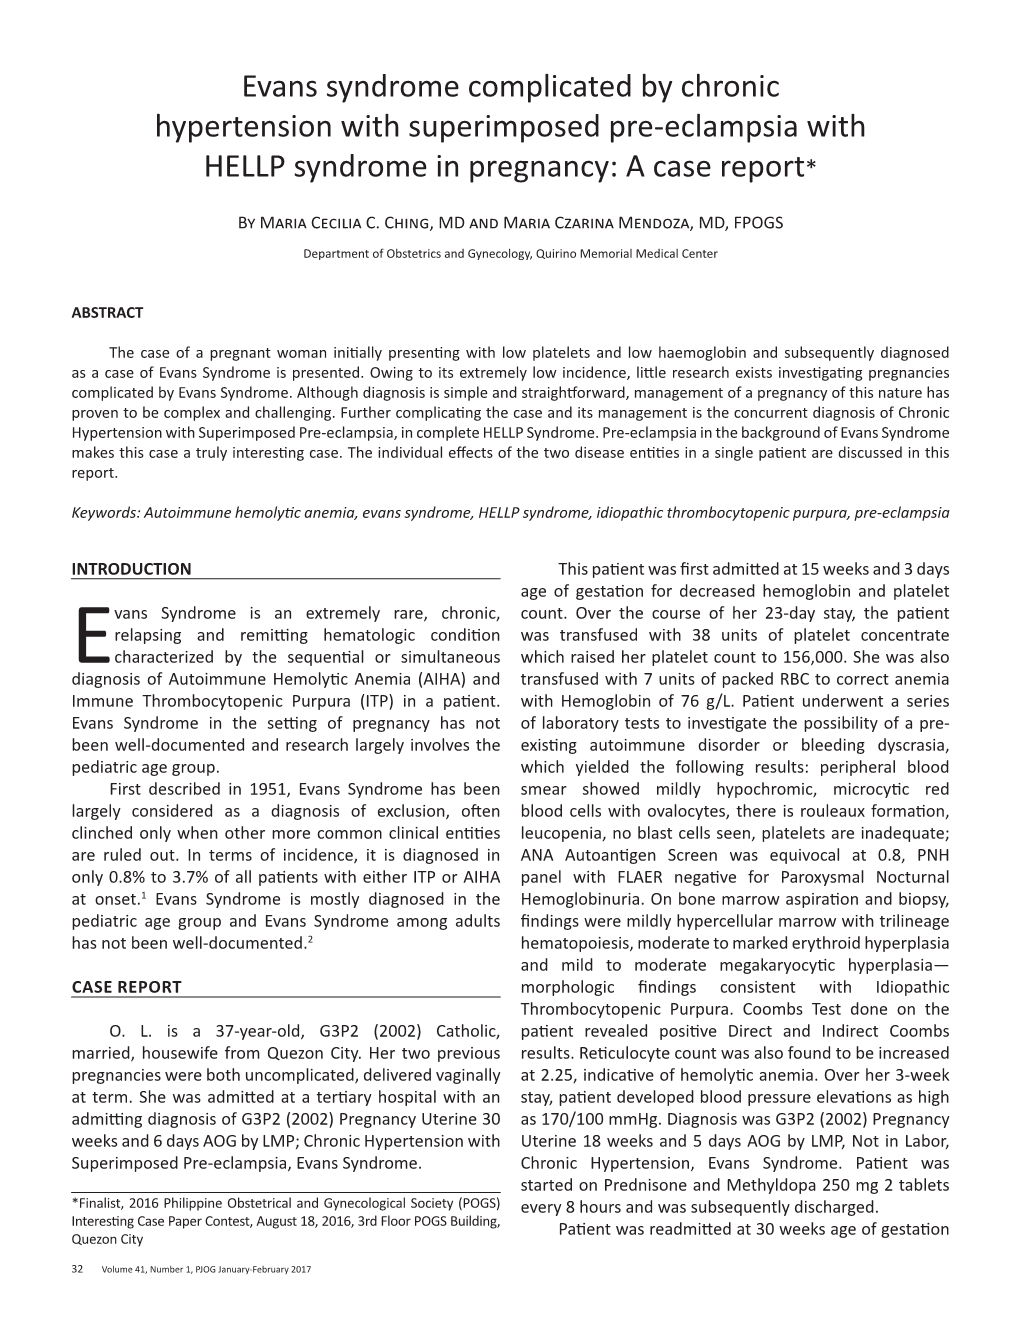 Evans Syndrome Complicated by Chronic Hypertension with Superimposed Pre-Eclampsia with HELLP Syndrome in Pregnancy: a Case Report*